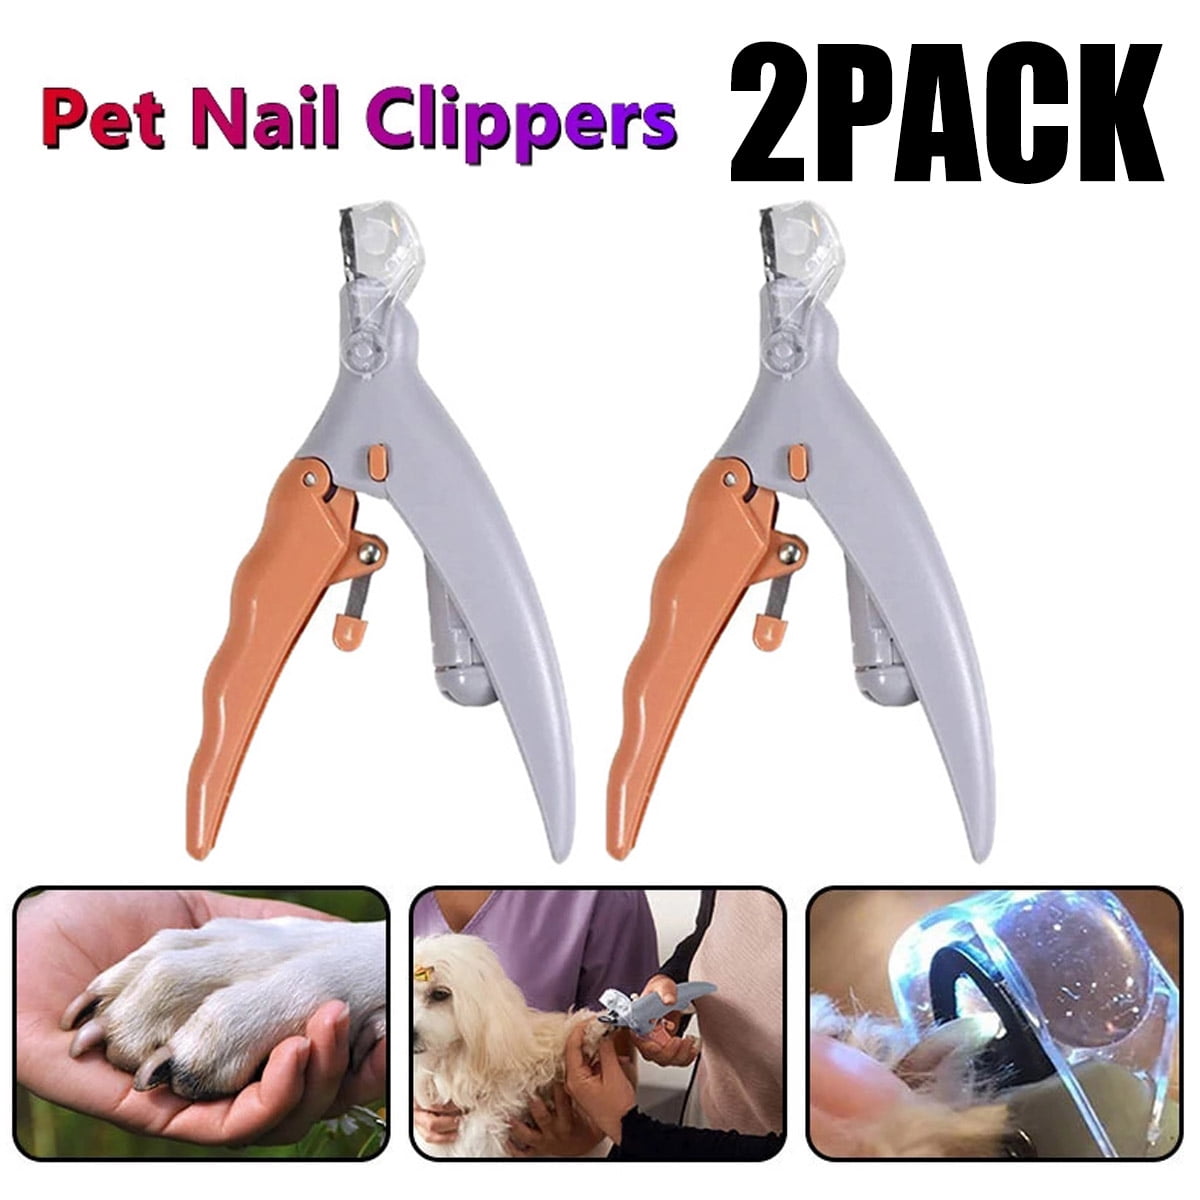 Super Grooming Pet Nail Clipper (Medium) Price - Buy Online at Best Price  in India